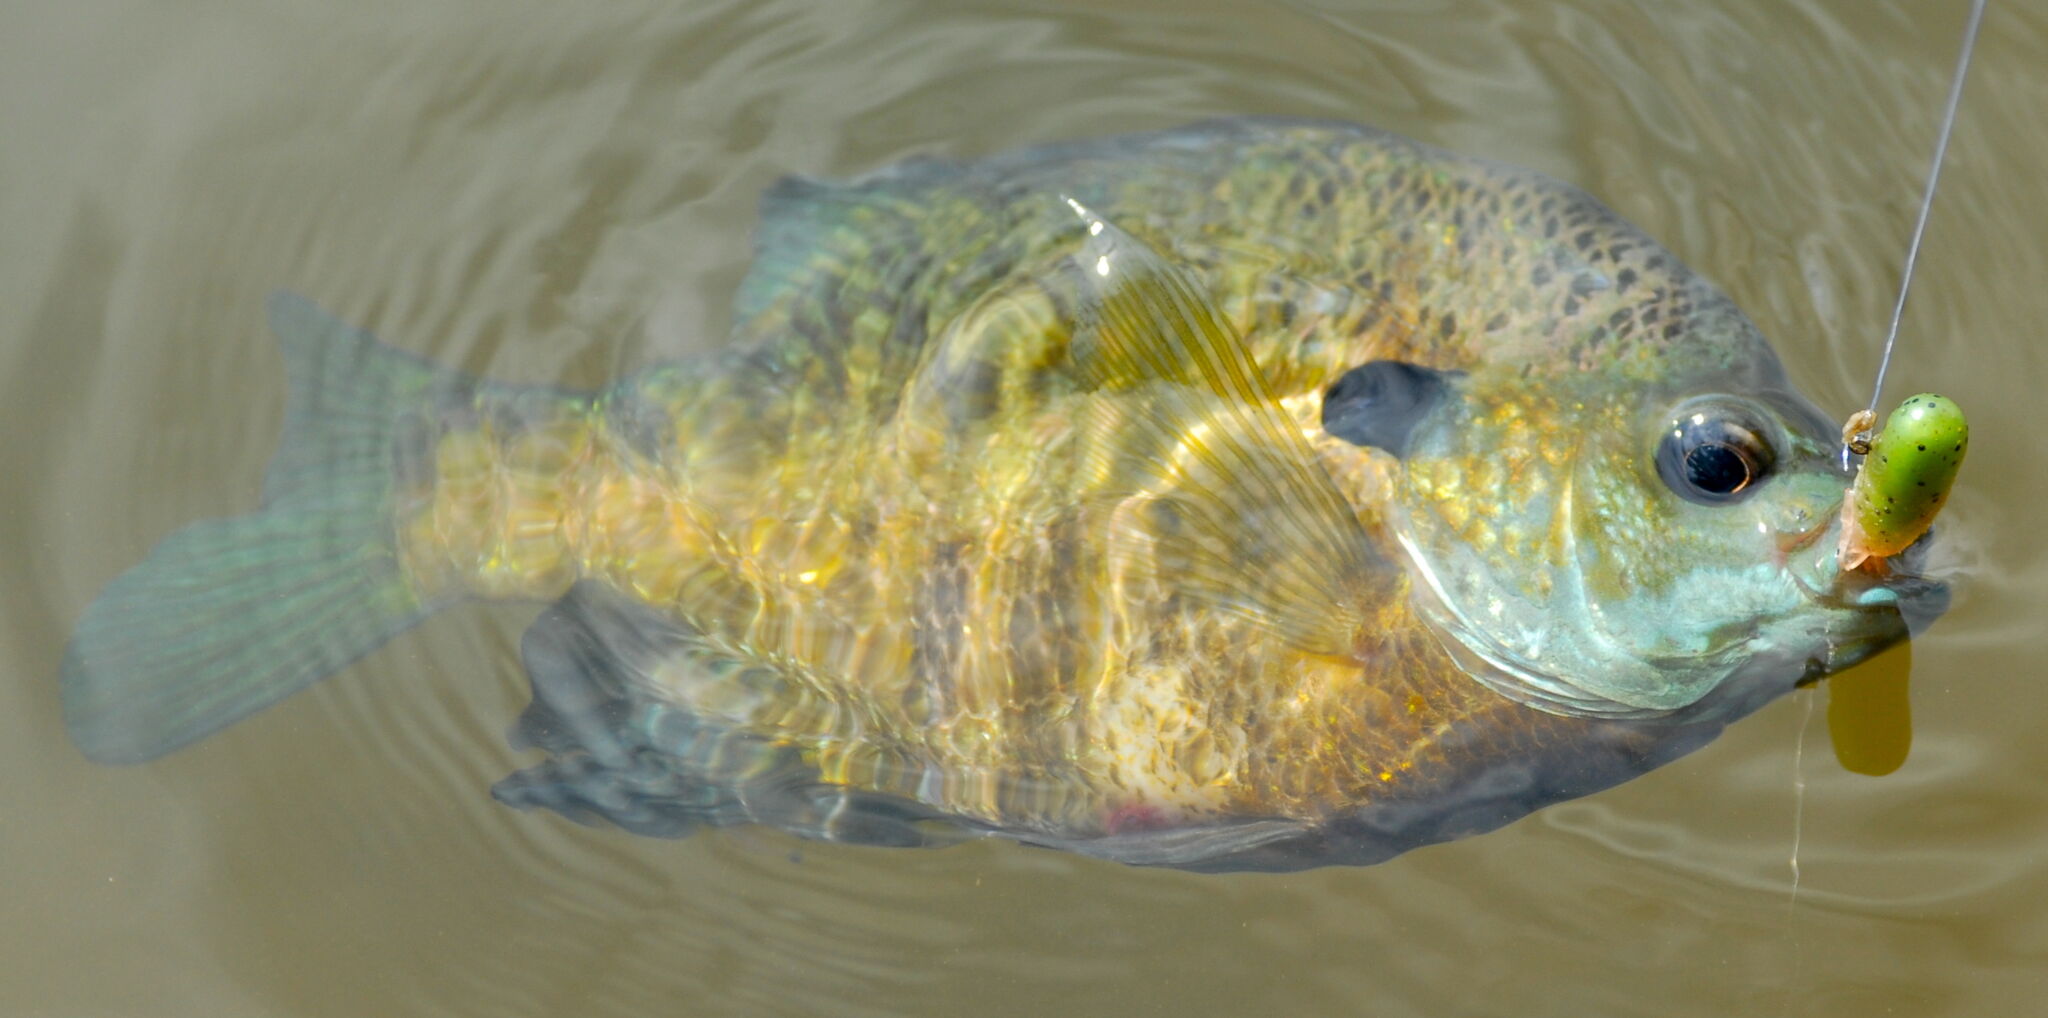 Sunny side up: Sunfish provide fast action all summer long